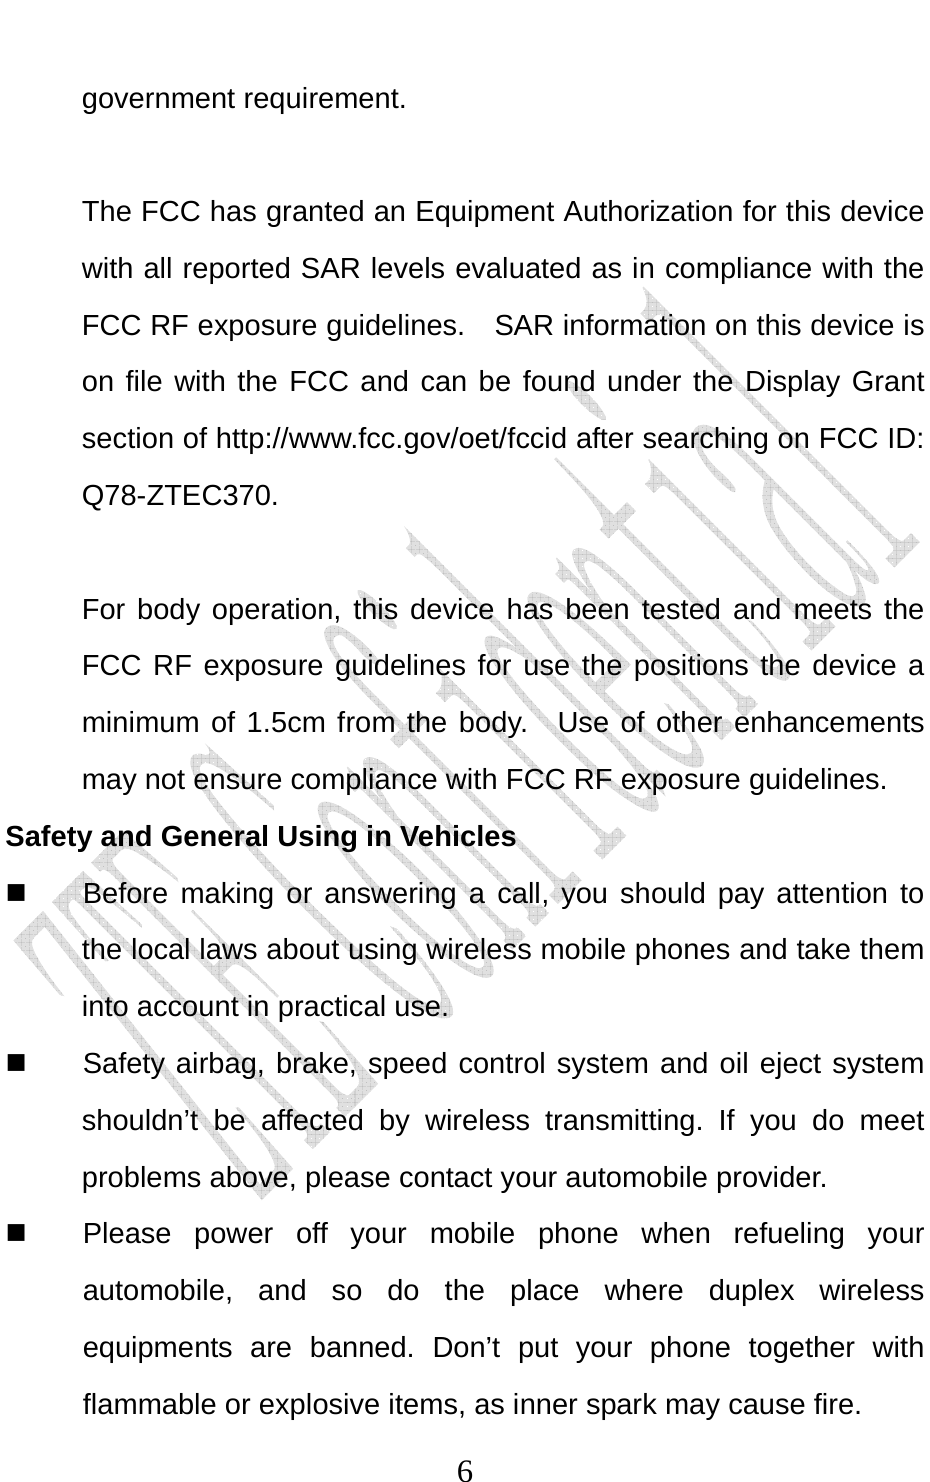                              6government requirement.  The FCC has granted an Equipment Authorization for this device with all reported SAR levels evaluated as in compliance with the FCC RF exposure guidelines.    SAR information on this device is on file with the FCC and can be found under the Display Grant section of http://www.fcc.gov/oet/fccid after searching on FCC ID: Q78-ZTEC370.  For body operation, this device has been tested and meets the FCC RF exposure guidelines for use the positions the device a minimum of 1.5cm from the body.  Use of other enhancements may not ensure compliance with FCC RF exposure guidelines. Safety and General Using in Vehicles   Before making or answering a call, you should pay attention to the local laws about using wireless mobile phones and take them into account in practical use.   Safety airbag, brake, speed control system and oil eject system shouldn’t be affected by wireless transmitting. If you do meet problems above, please contact your automobile provider.   Please power off your mobile phone when refueling your automobile, and so do the place where duplex wireless equipments are banned. Don’t put your phone together with flammable or explosive items, as inner spark may cause fire. 